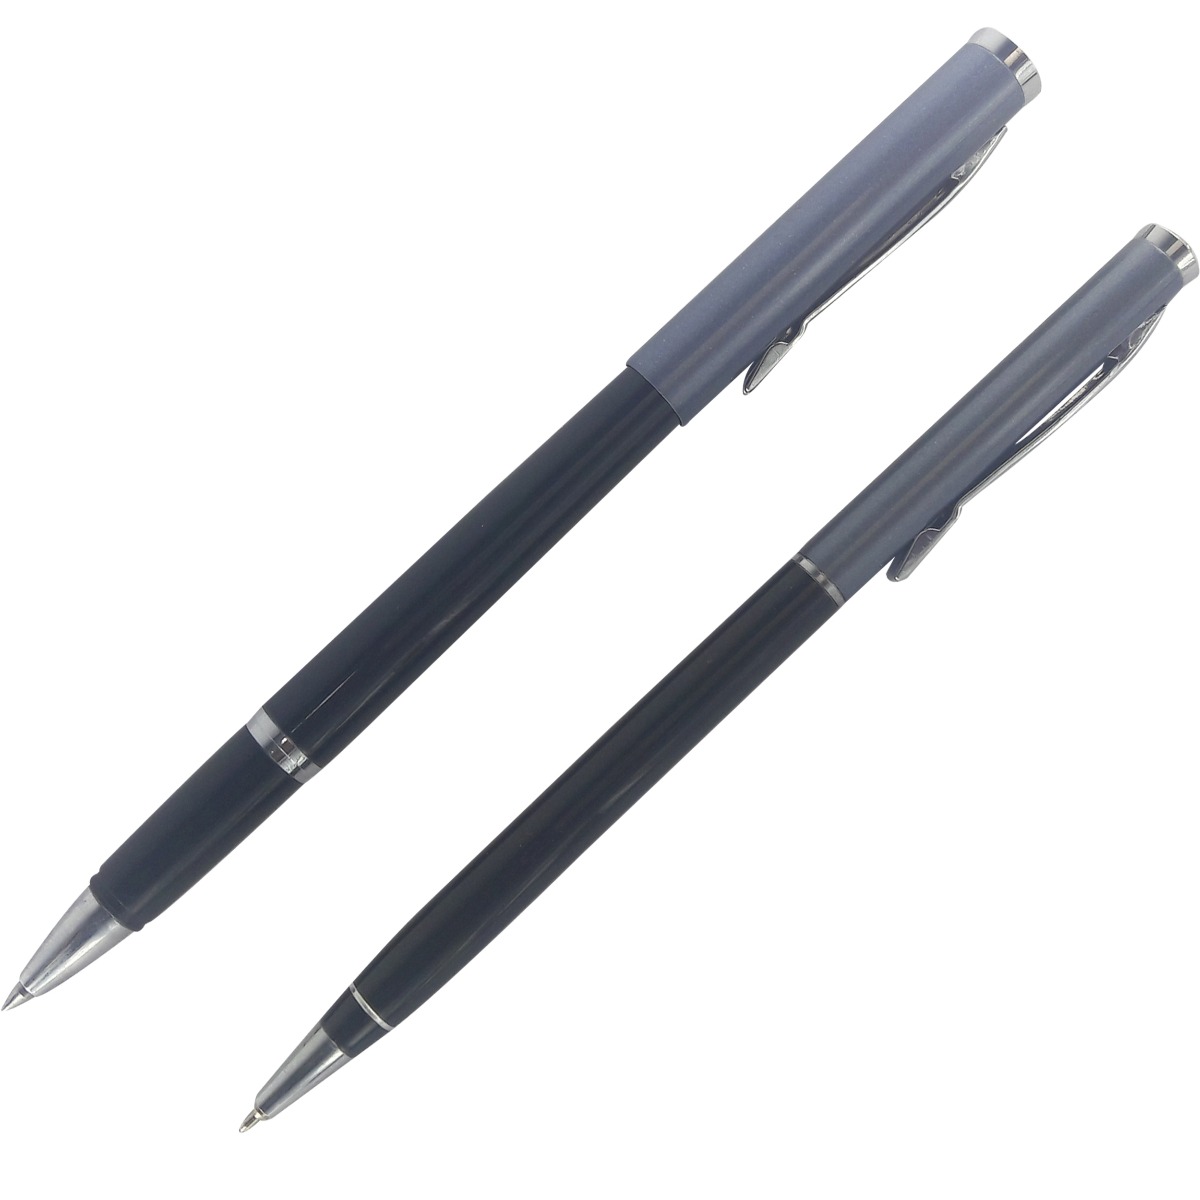 PIERRE CARDIN BEAUTIFUL SLIM BLACK AND GREY BODY ROLLER AND BALL PEN MODEL: 12685